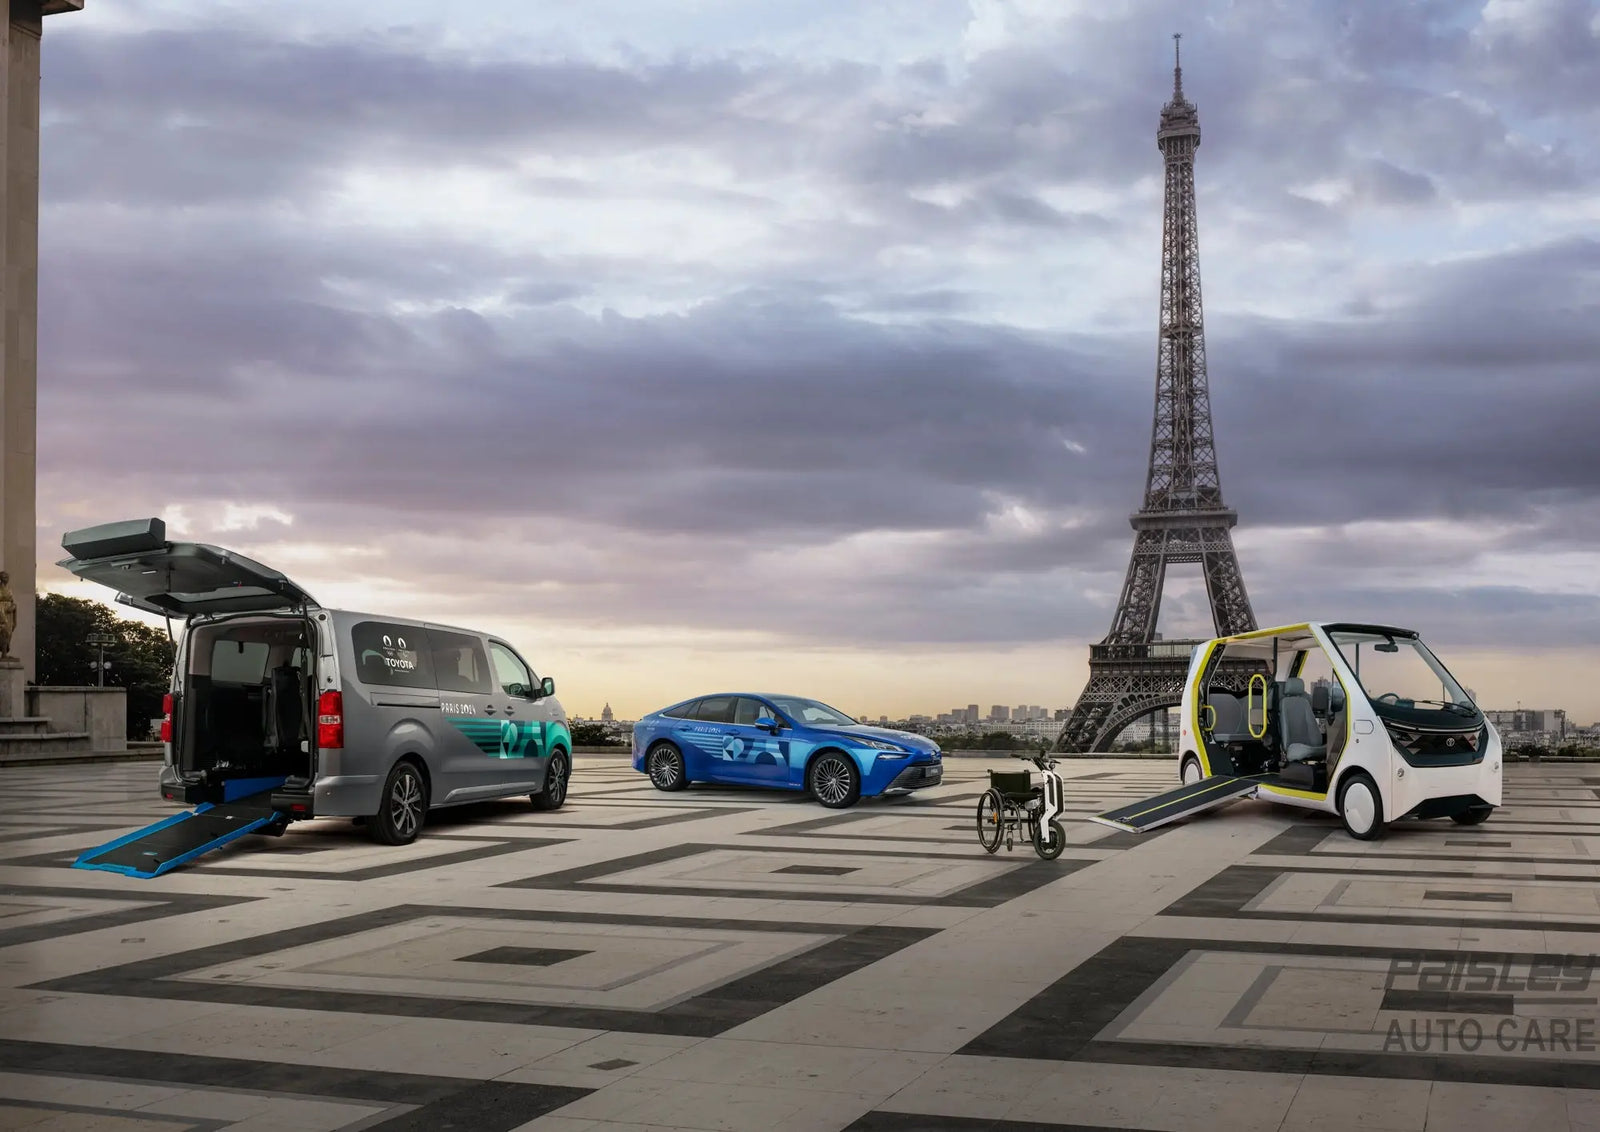 Toyota's Superlative Electric Mobility Solutions for Paris 2024 - Paisley Autocare